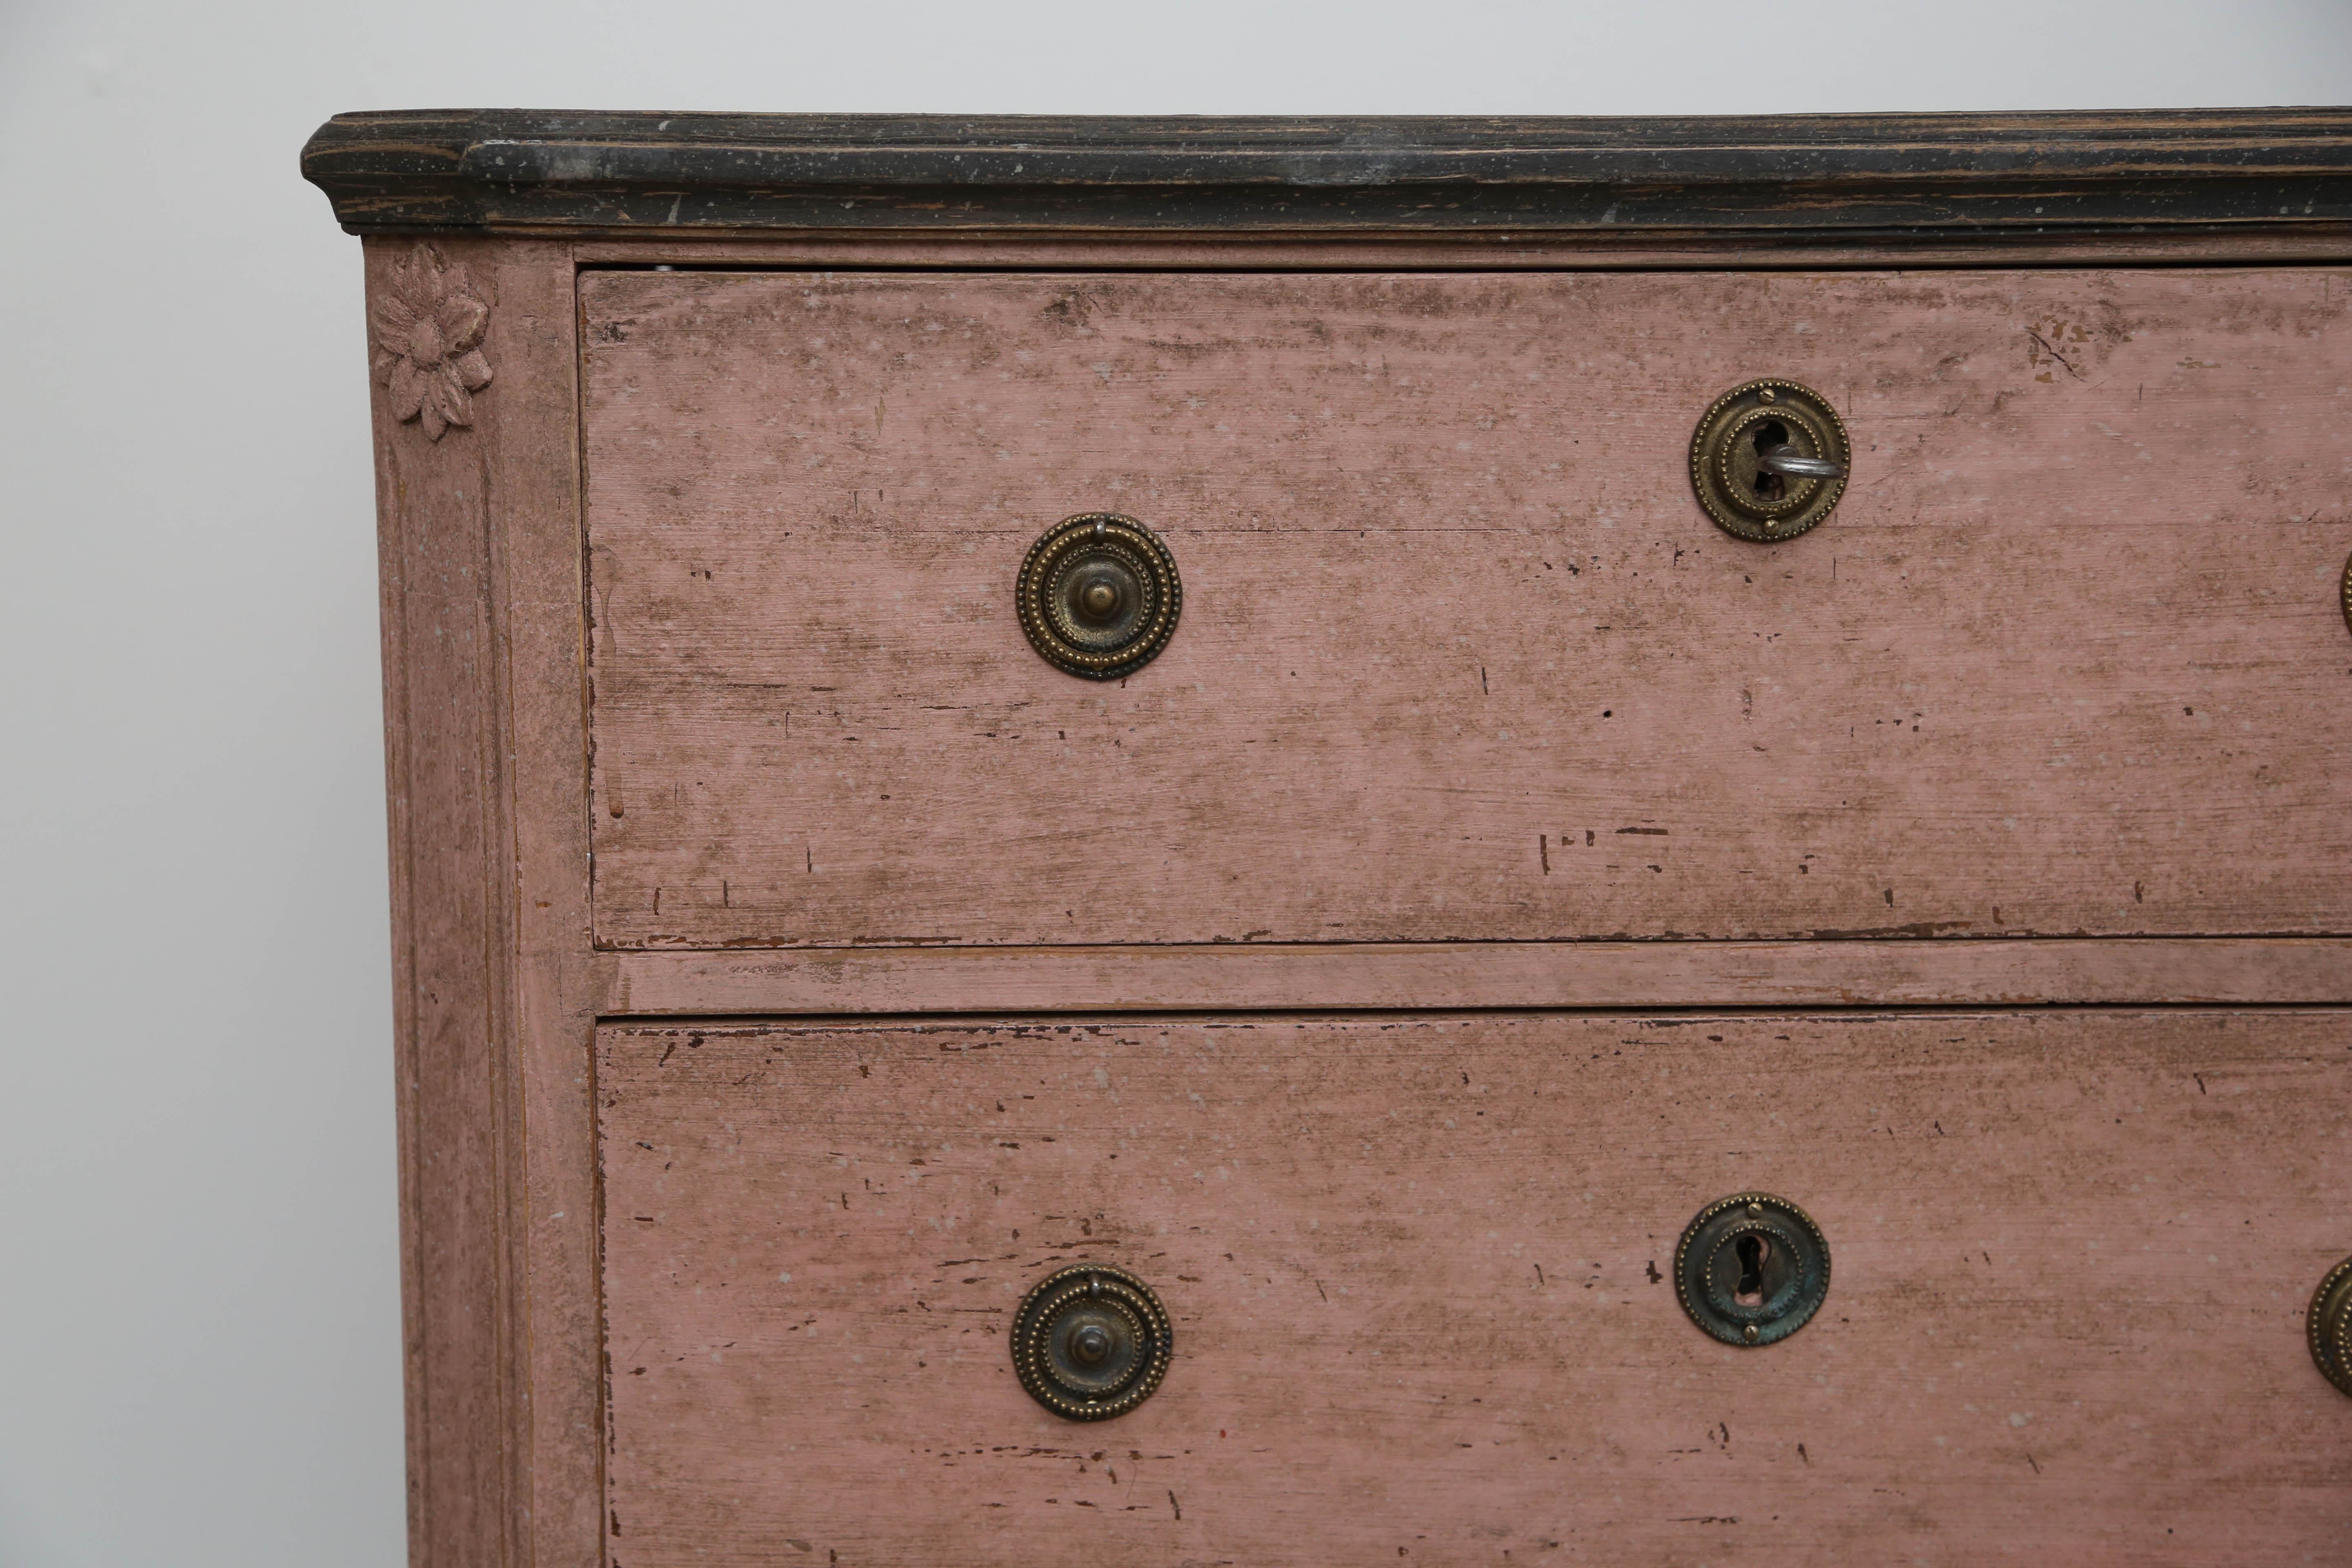 Pair of antique Swedish Gustavian style rose distressed painted chests. The tops are faux painted in dark greyish marble and extends down to the carved crown border, cut fluted carved corners with a rosette at top, ending in tapered fluted feet.